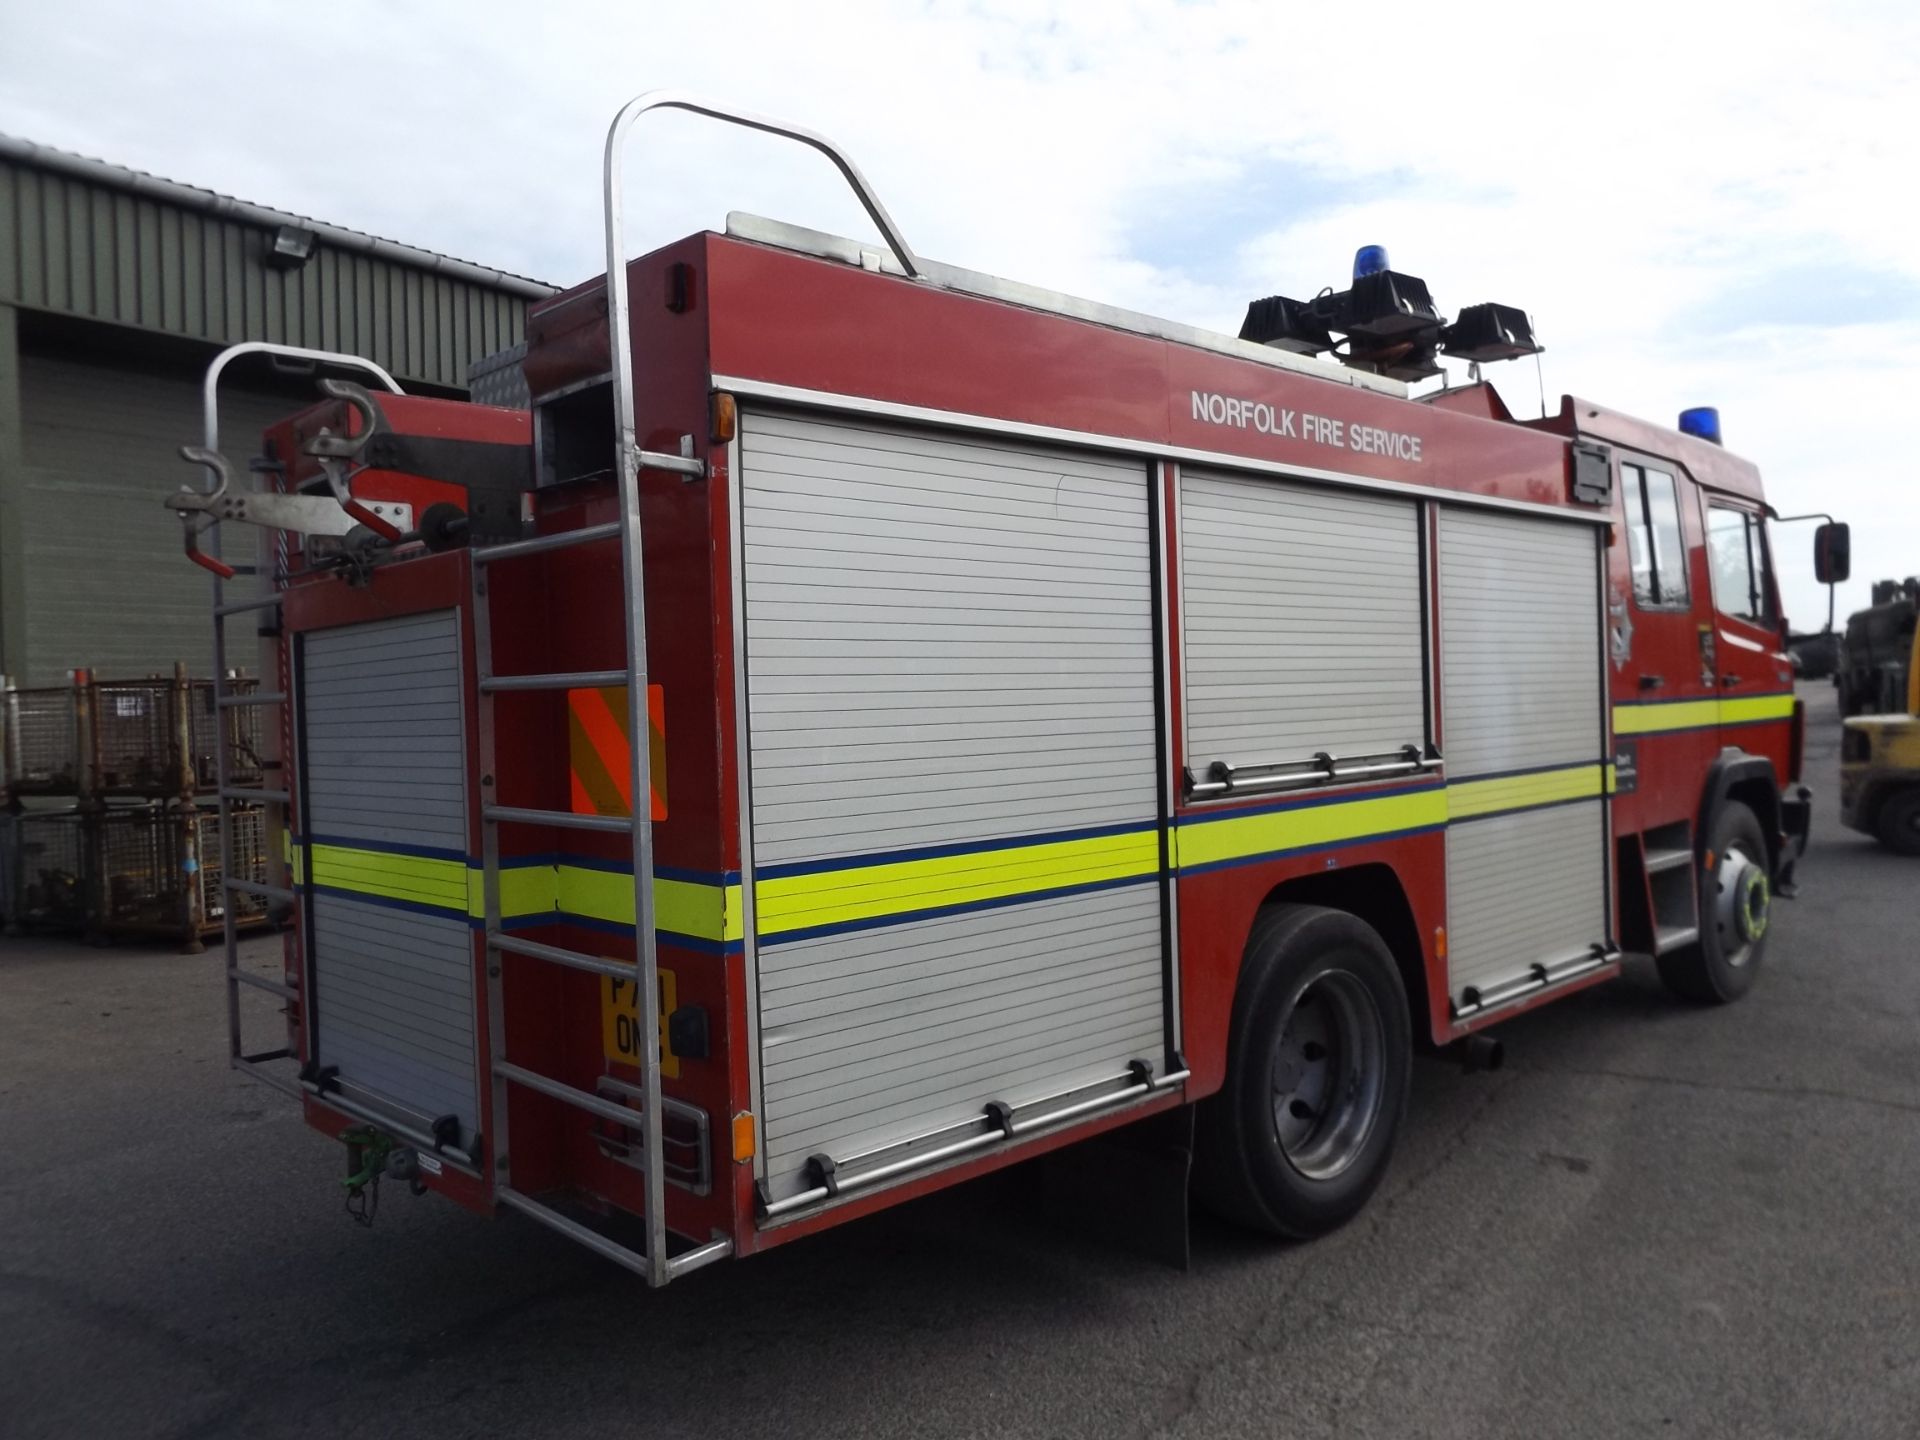 Mercedes 1124 Excaliber Fire Engine - Image 6 of 16